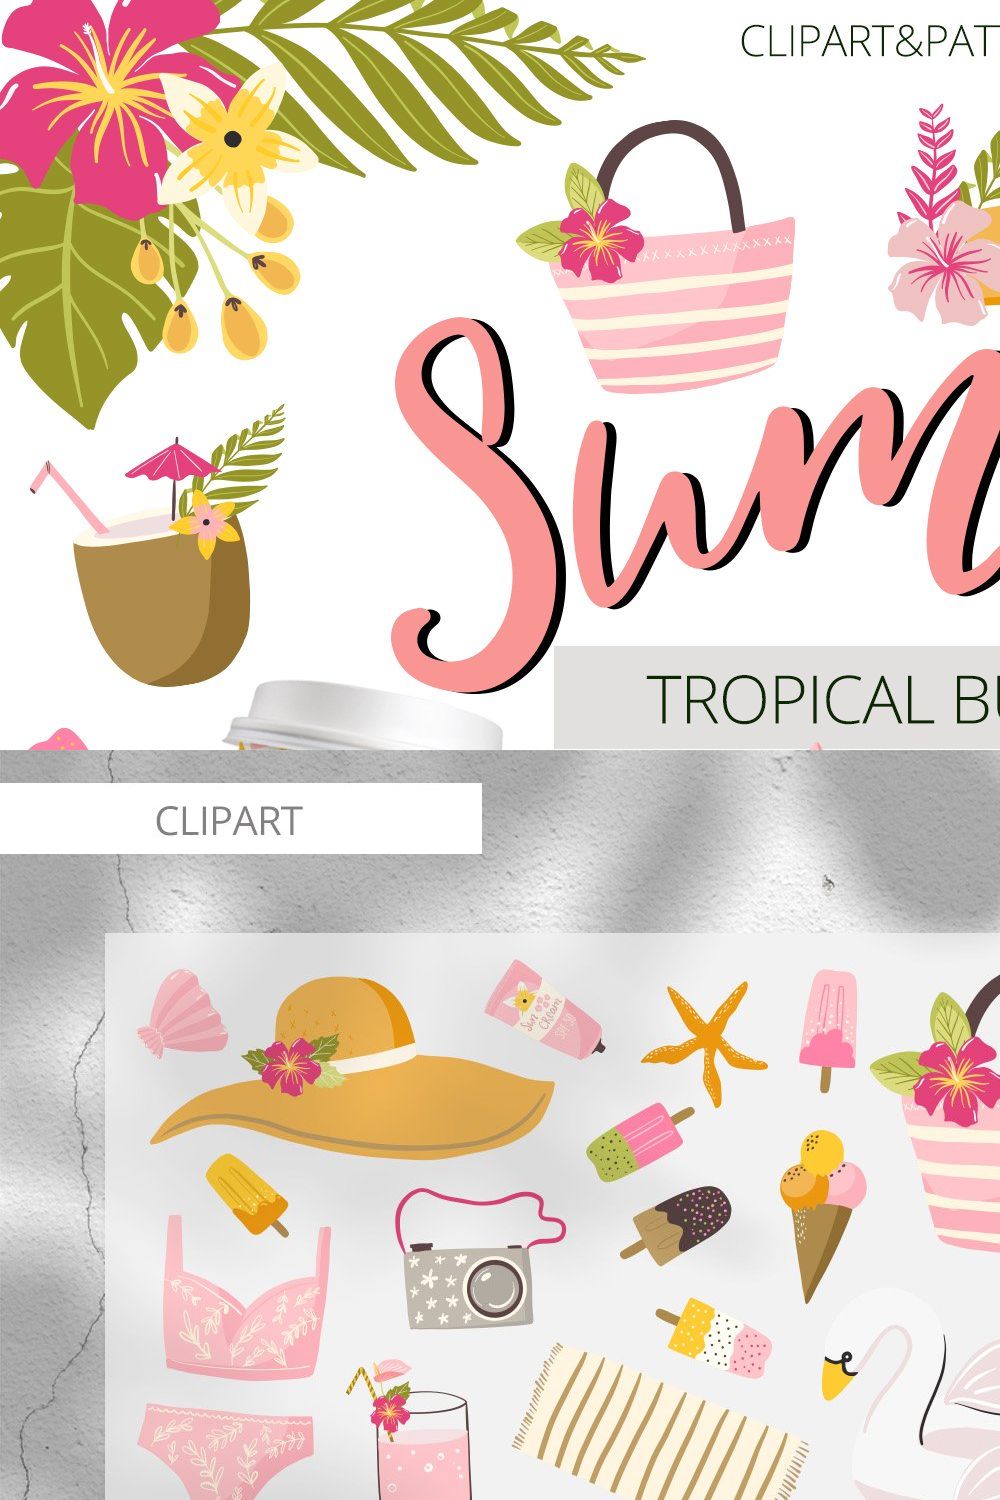 Summer Tropical clipart & patterns pinterest preview image.